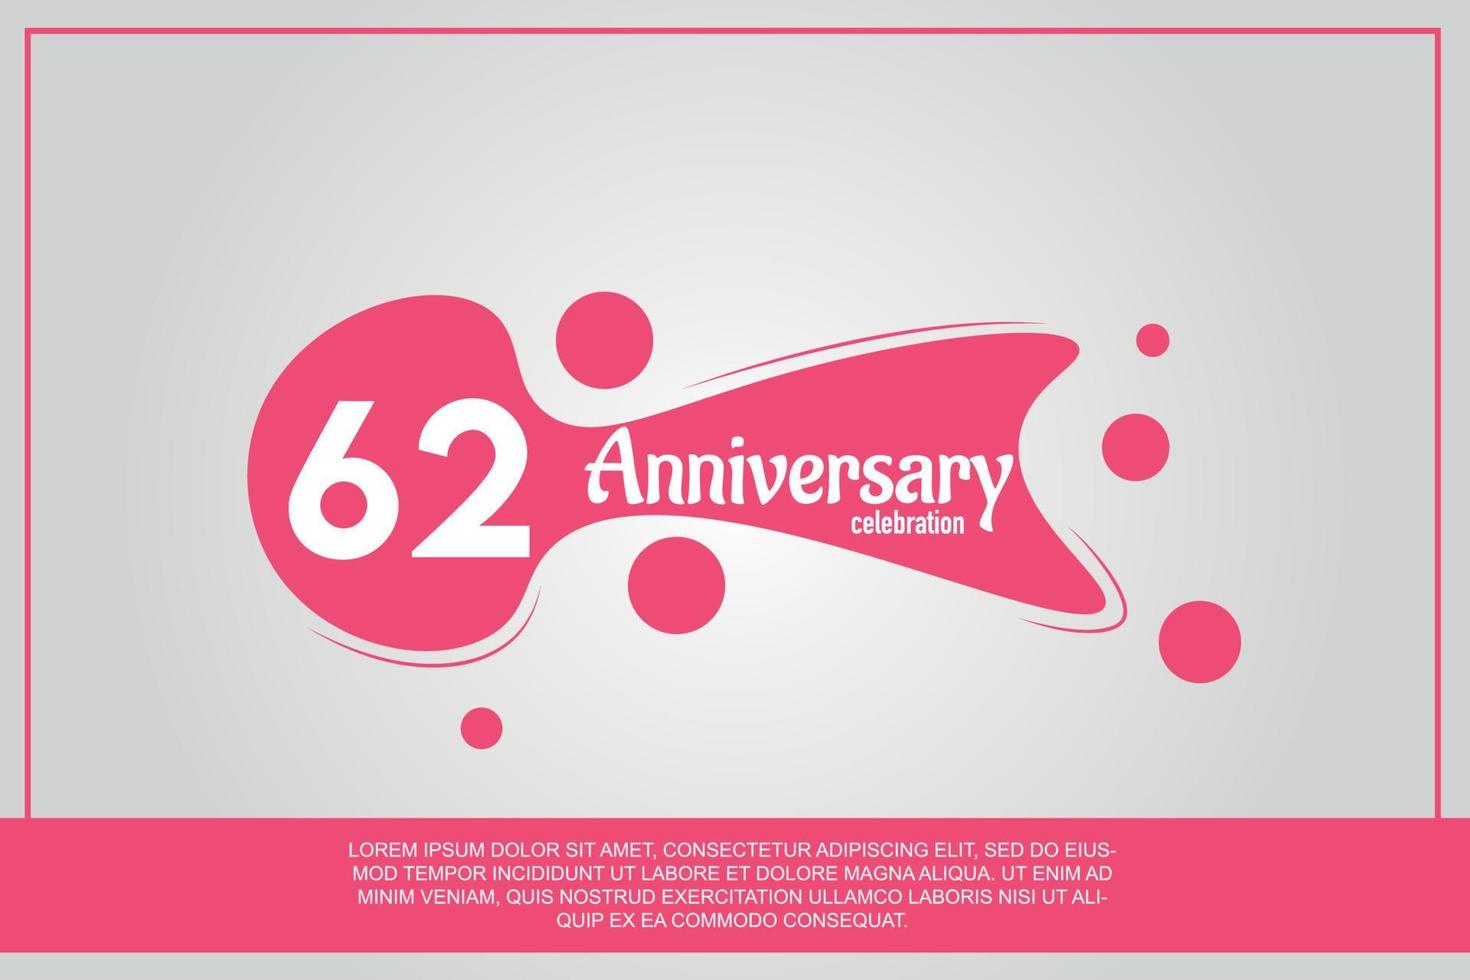 62 year anniversary celebration logo with pink color design with pink color bubbles on gray background vector abstract illustration